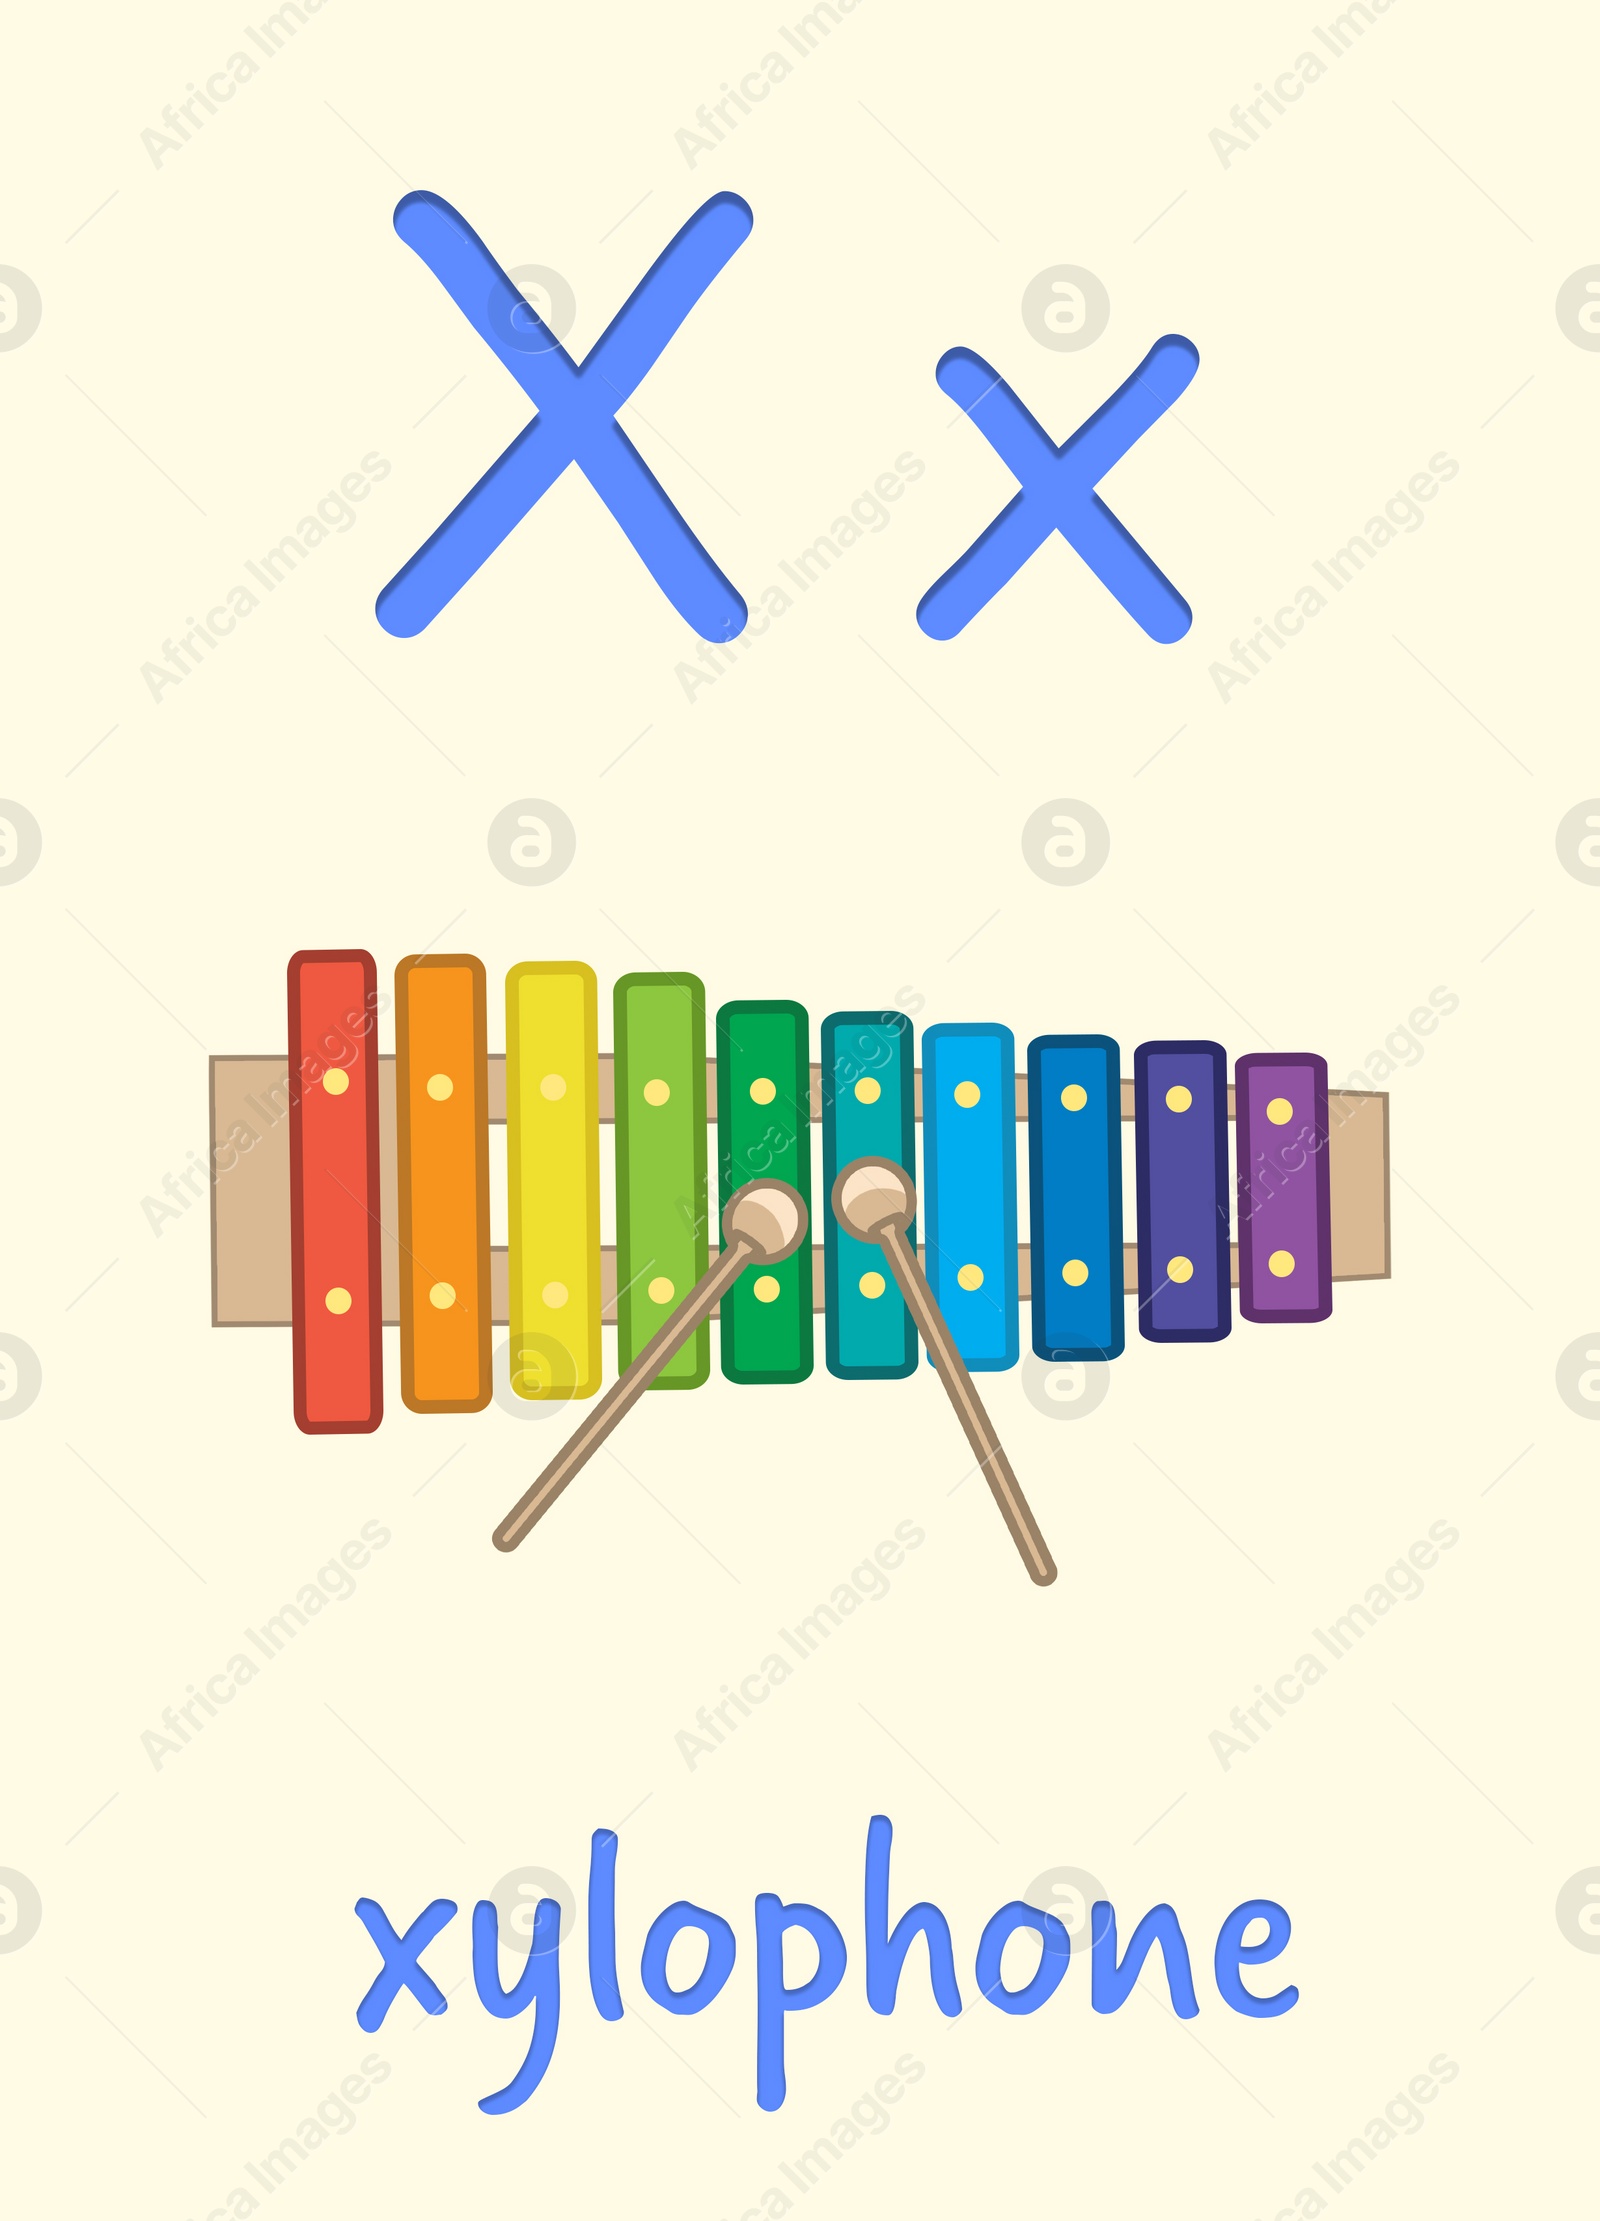 Illustration of Learning English alphabet. Card with letter X and xylophone, illustration